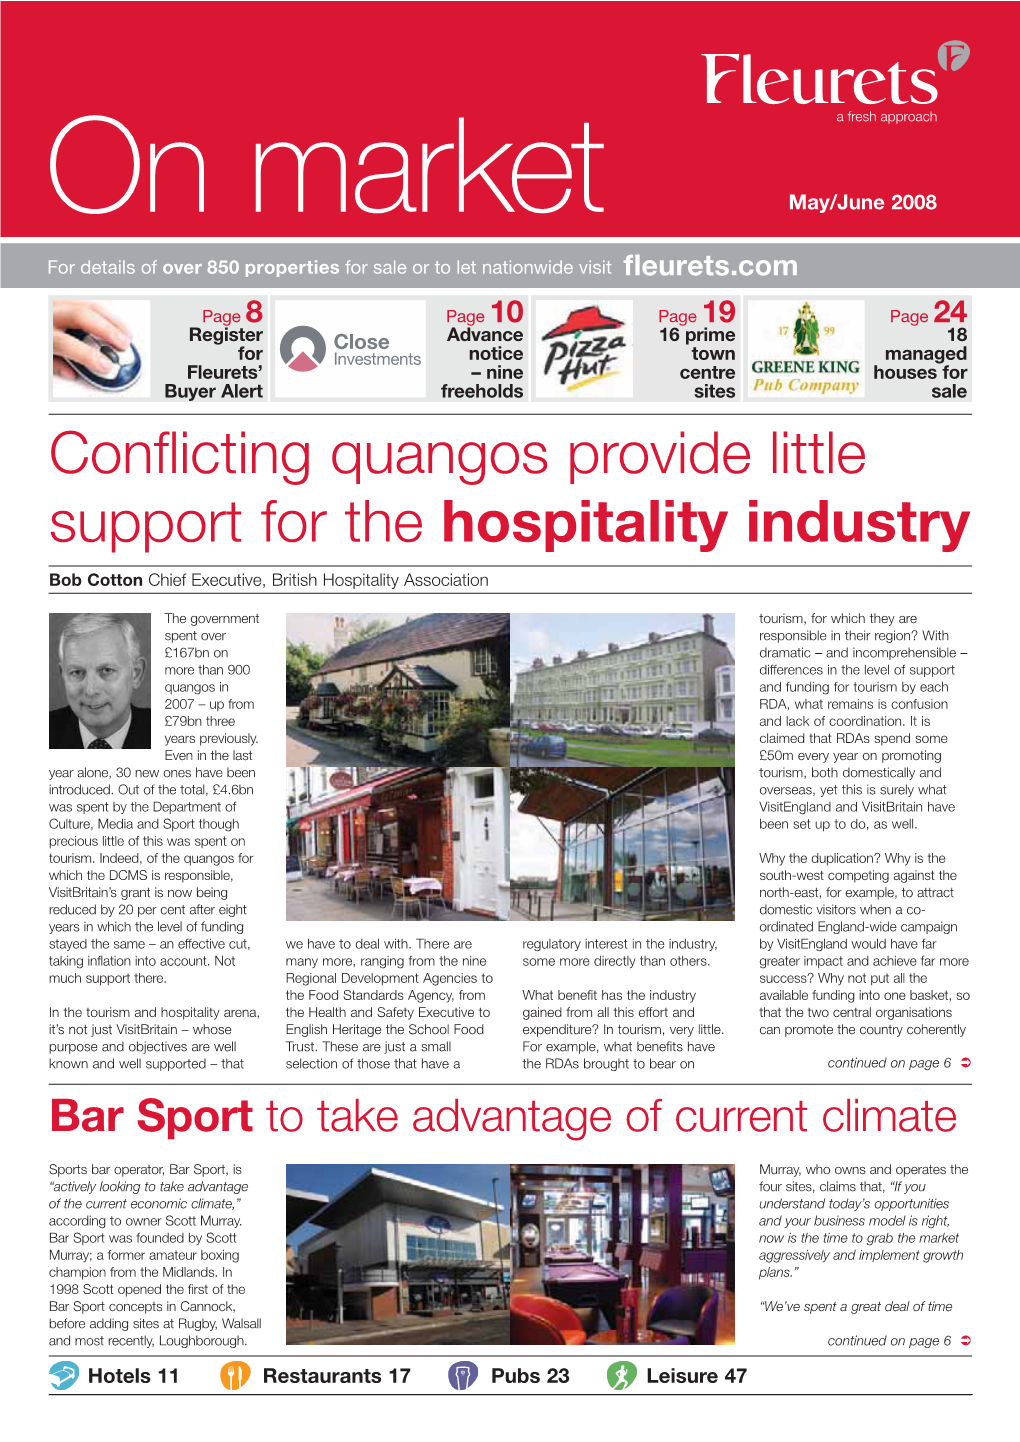 Conflicting Quangos Provide Little Support for the Hospitality Industry